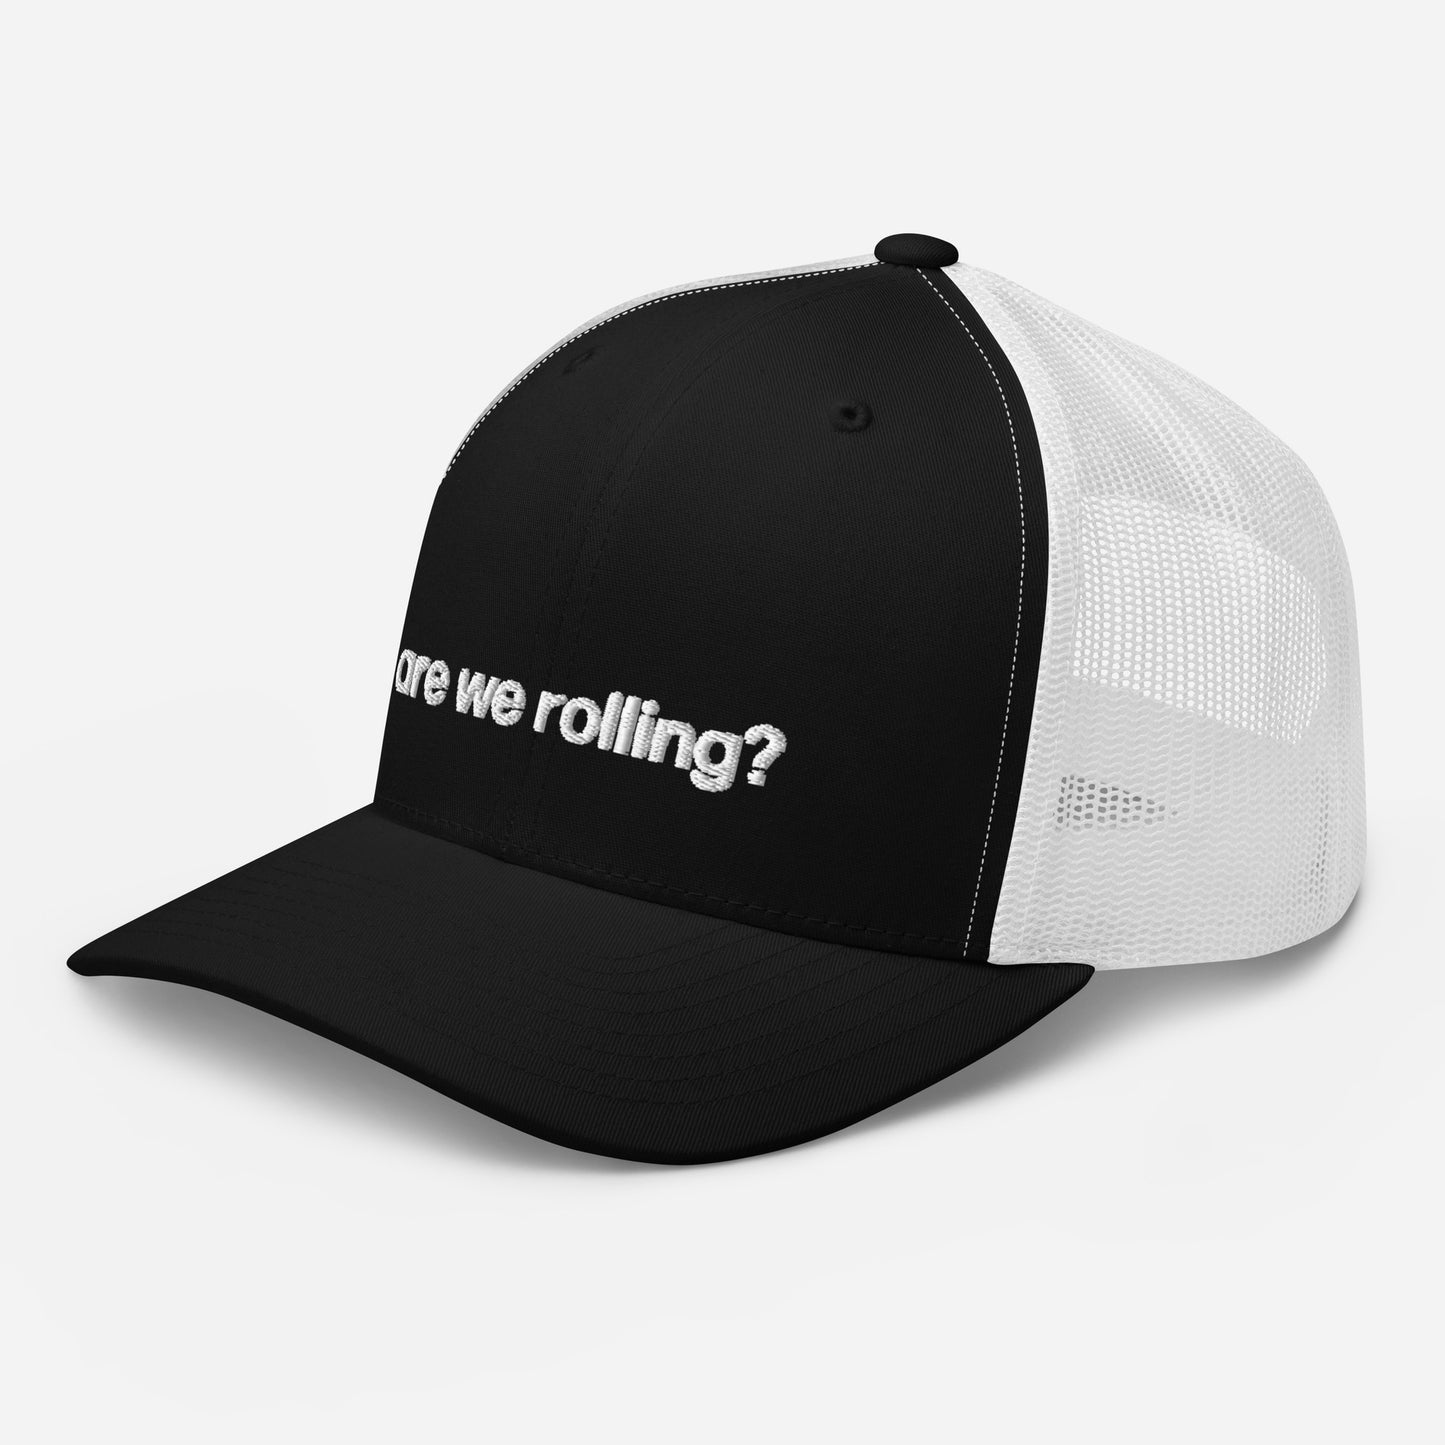 are we rolling? | trucker hat